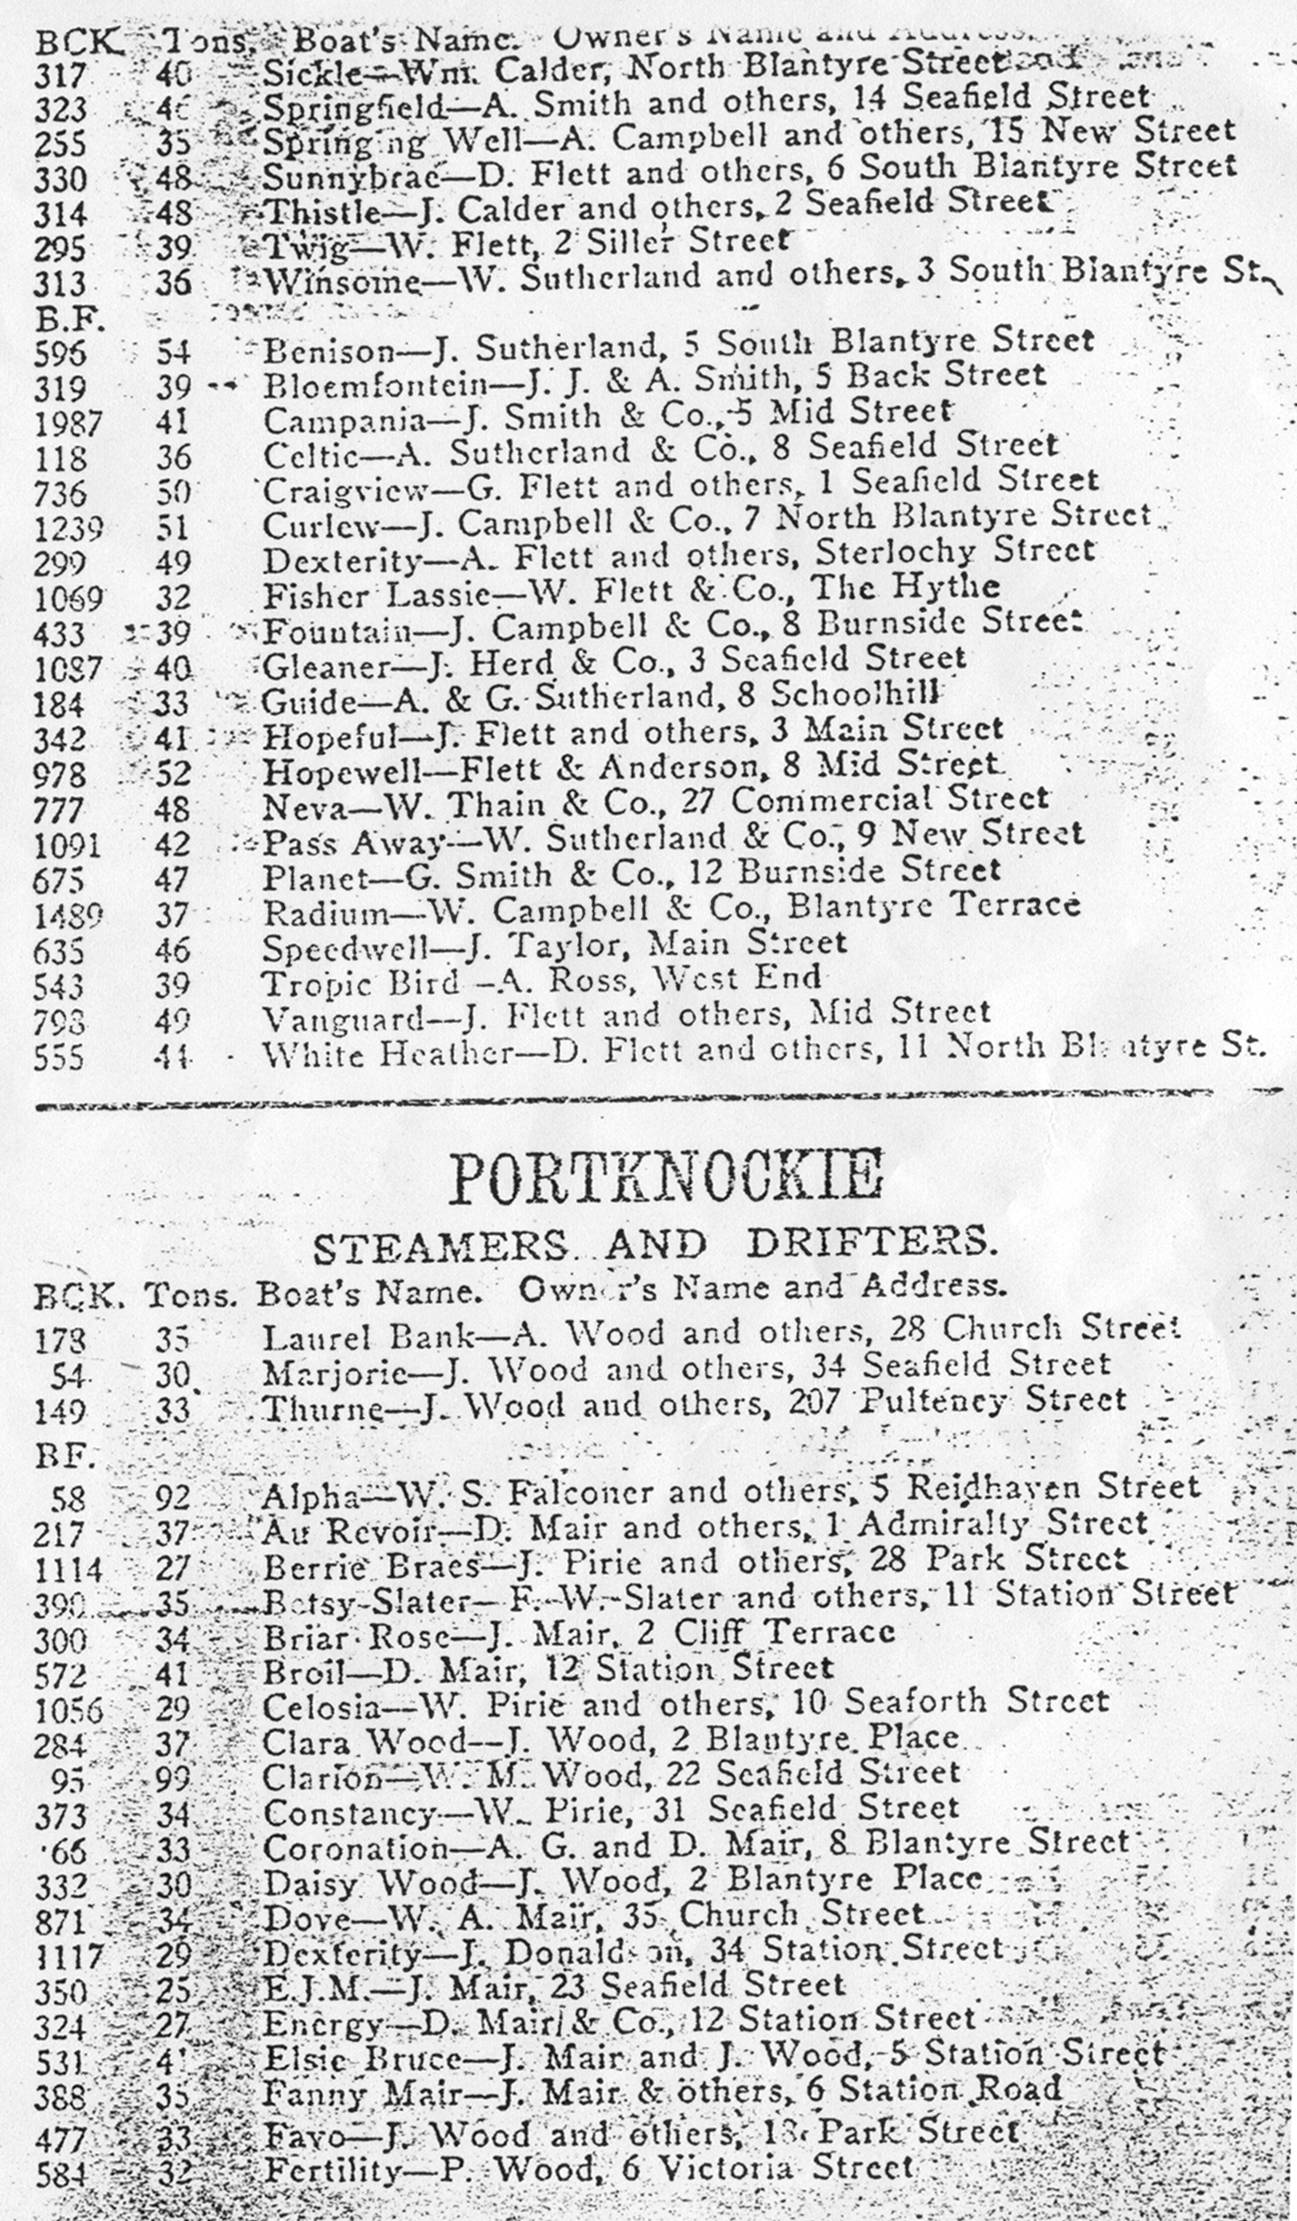 Buckie and District Directory 1926, page 133, Steamers and Drifters